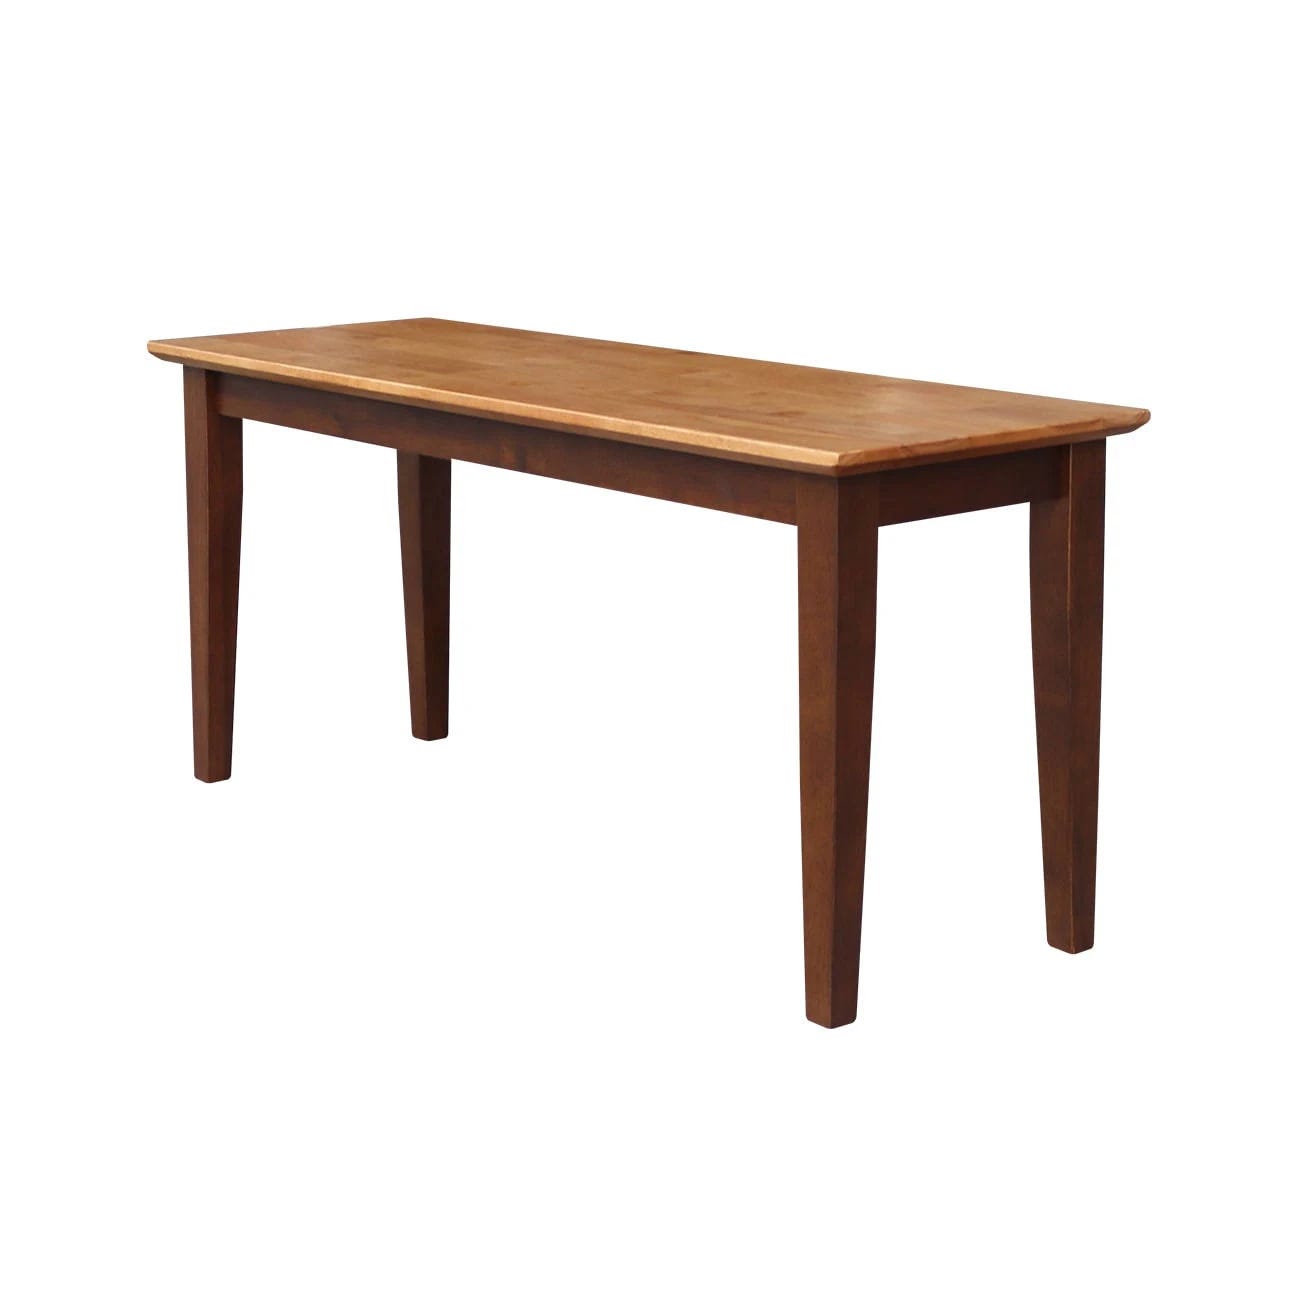 Solid Wood Shaker Styled Contemporary Bench in Cinnamon/Espresso | Image